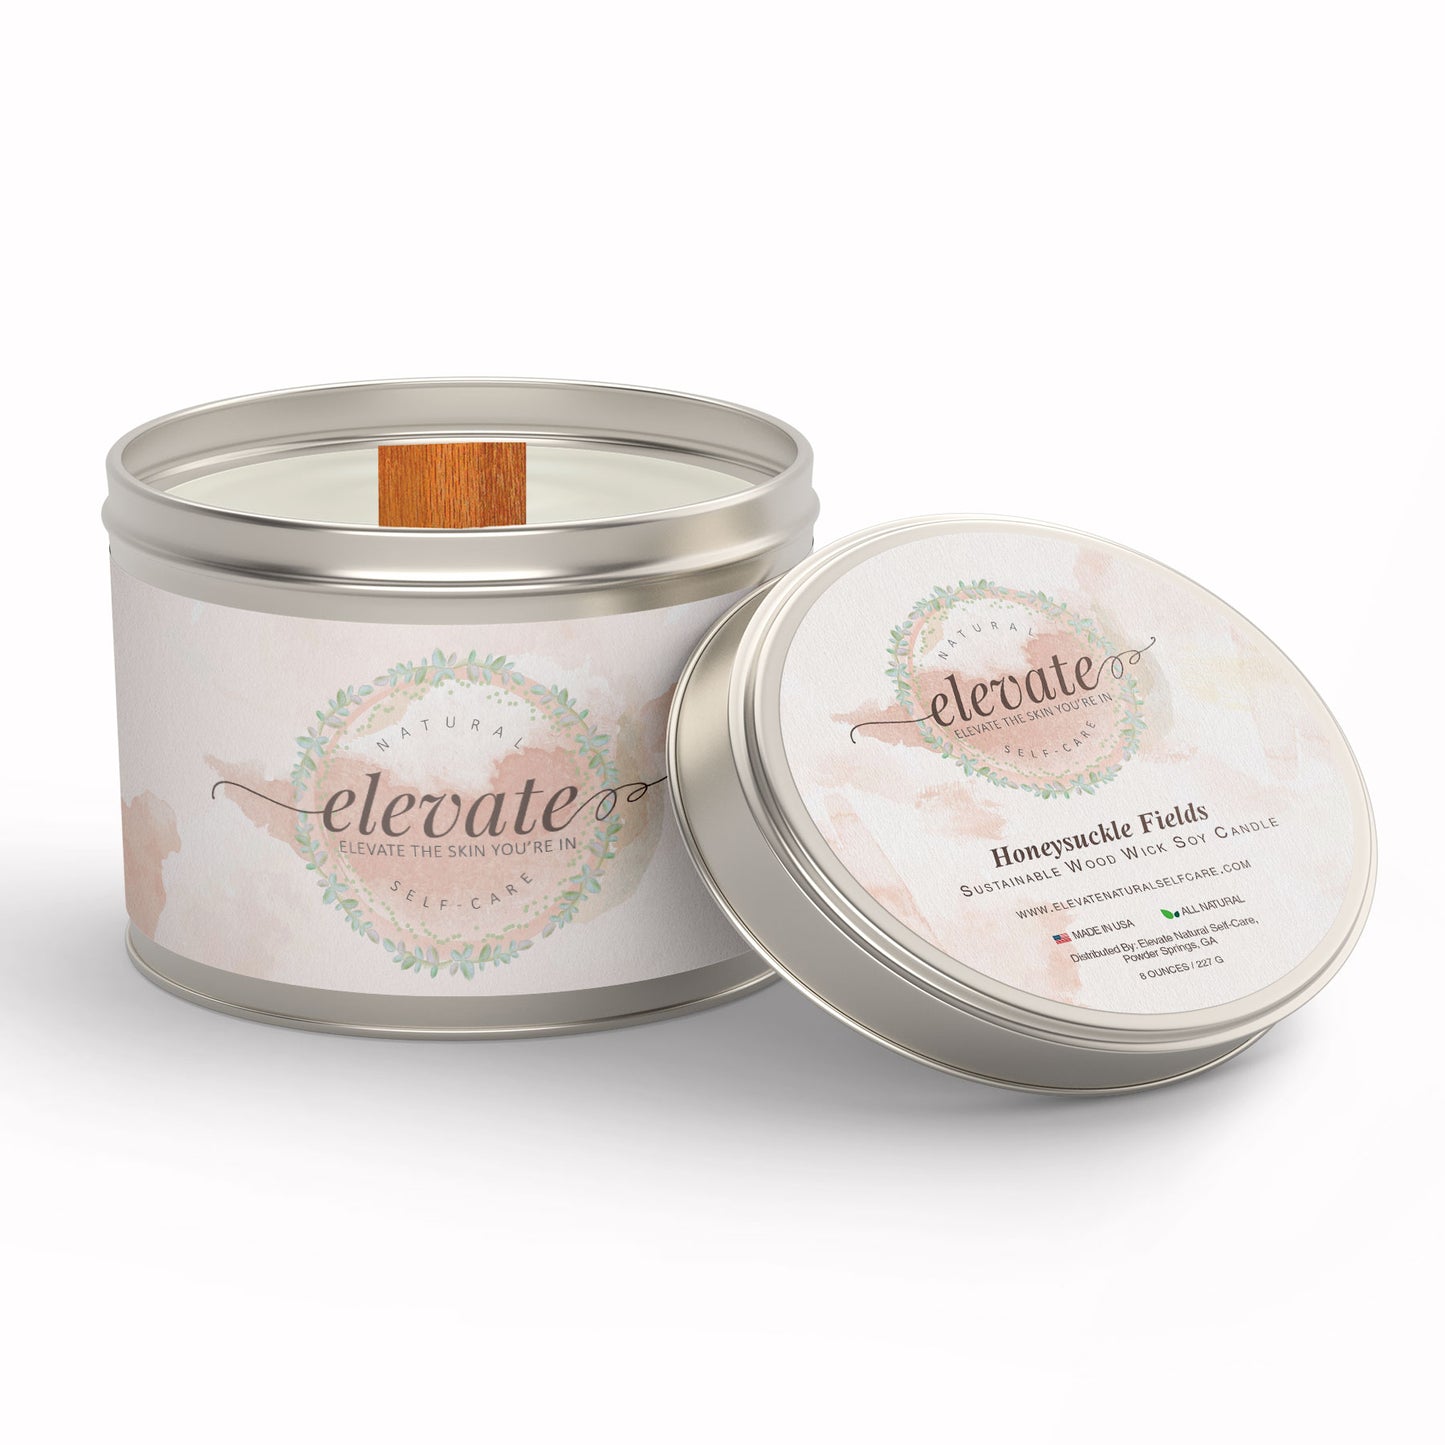 Honeysuckle Fields Sustainable Wood Wick Soy Candle